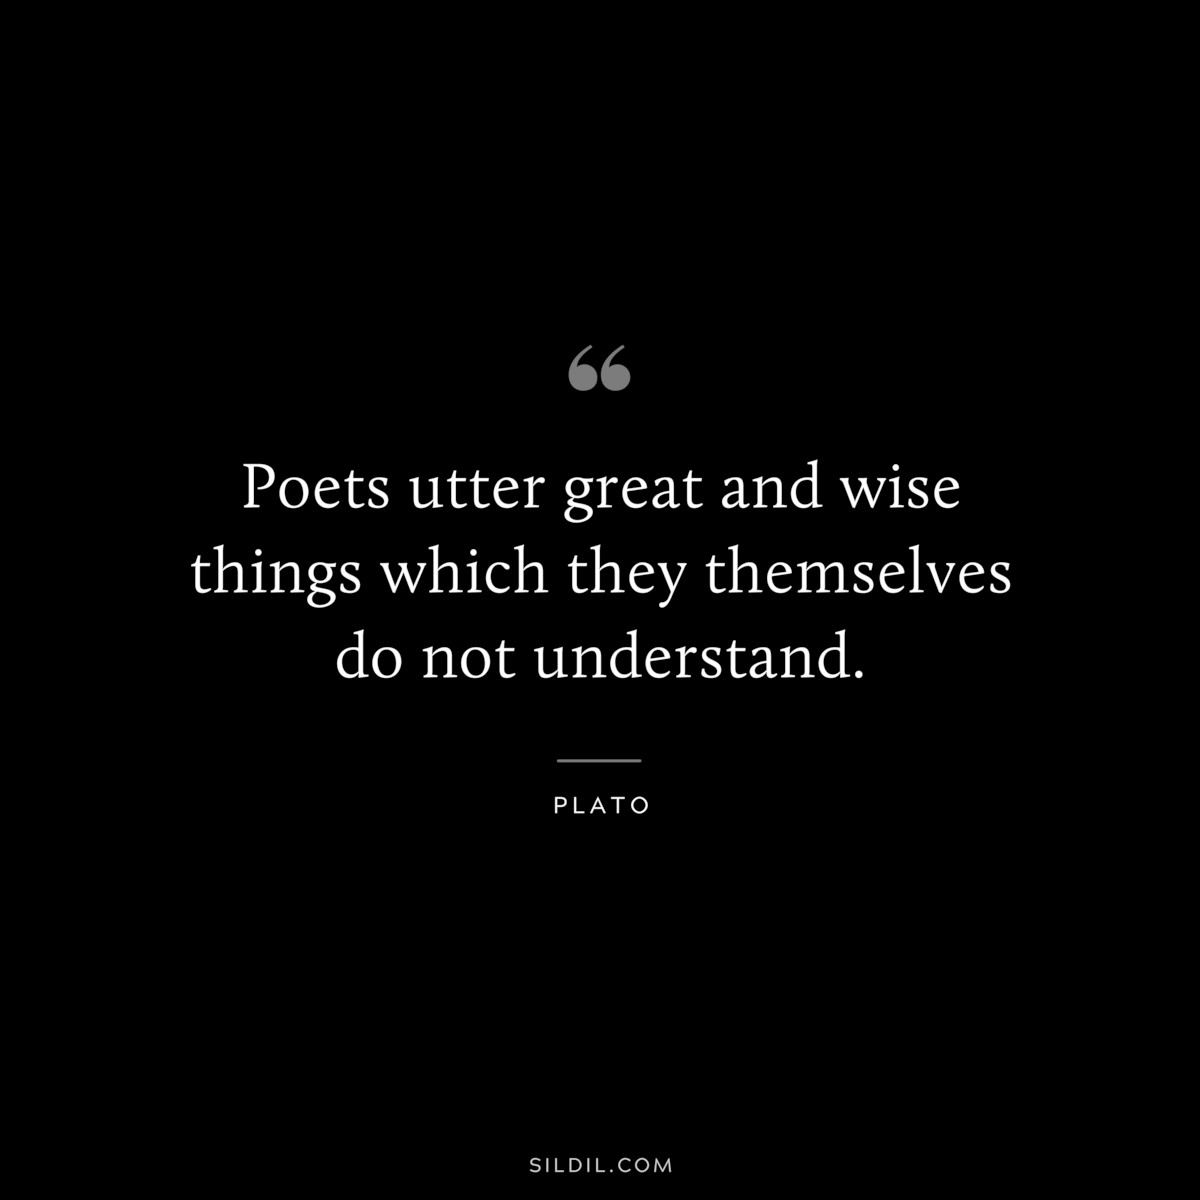 Poets utter great and wise things which they themselves do not understand. ― Plato